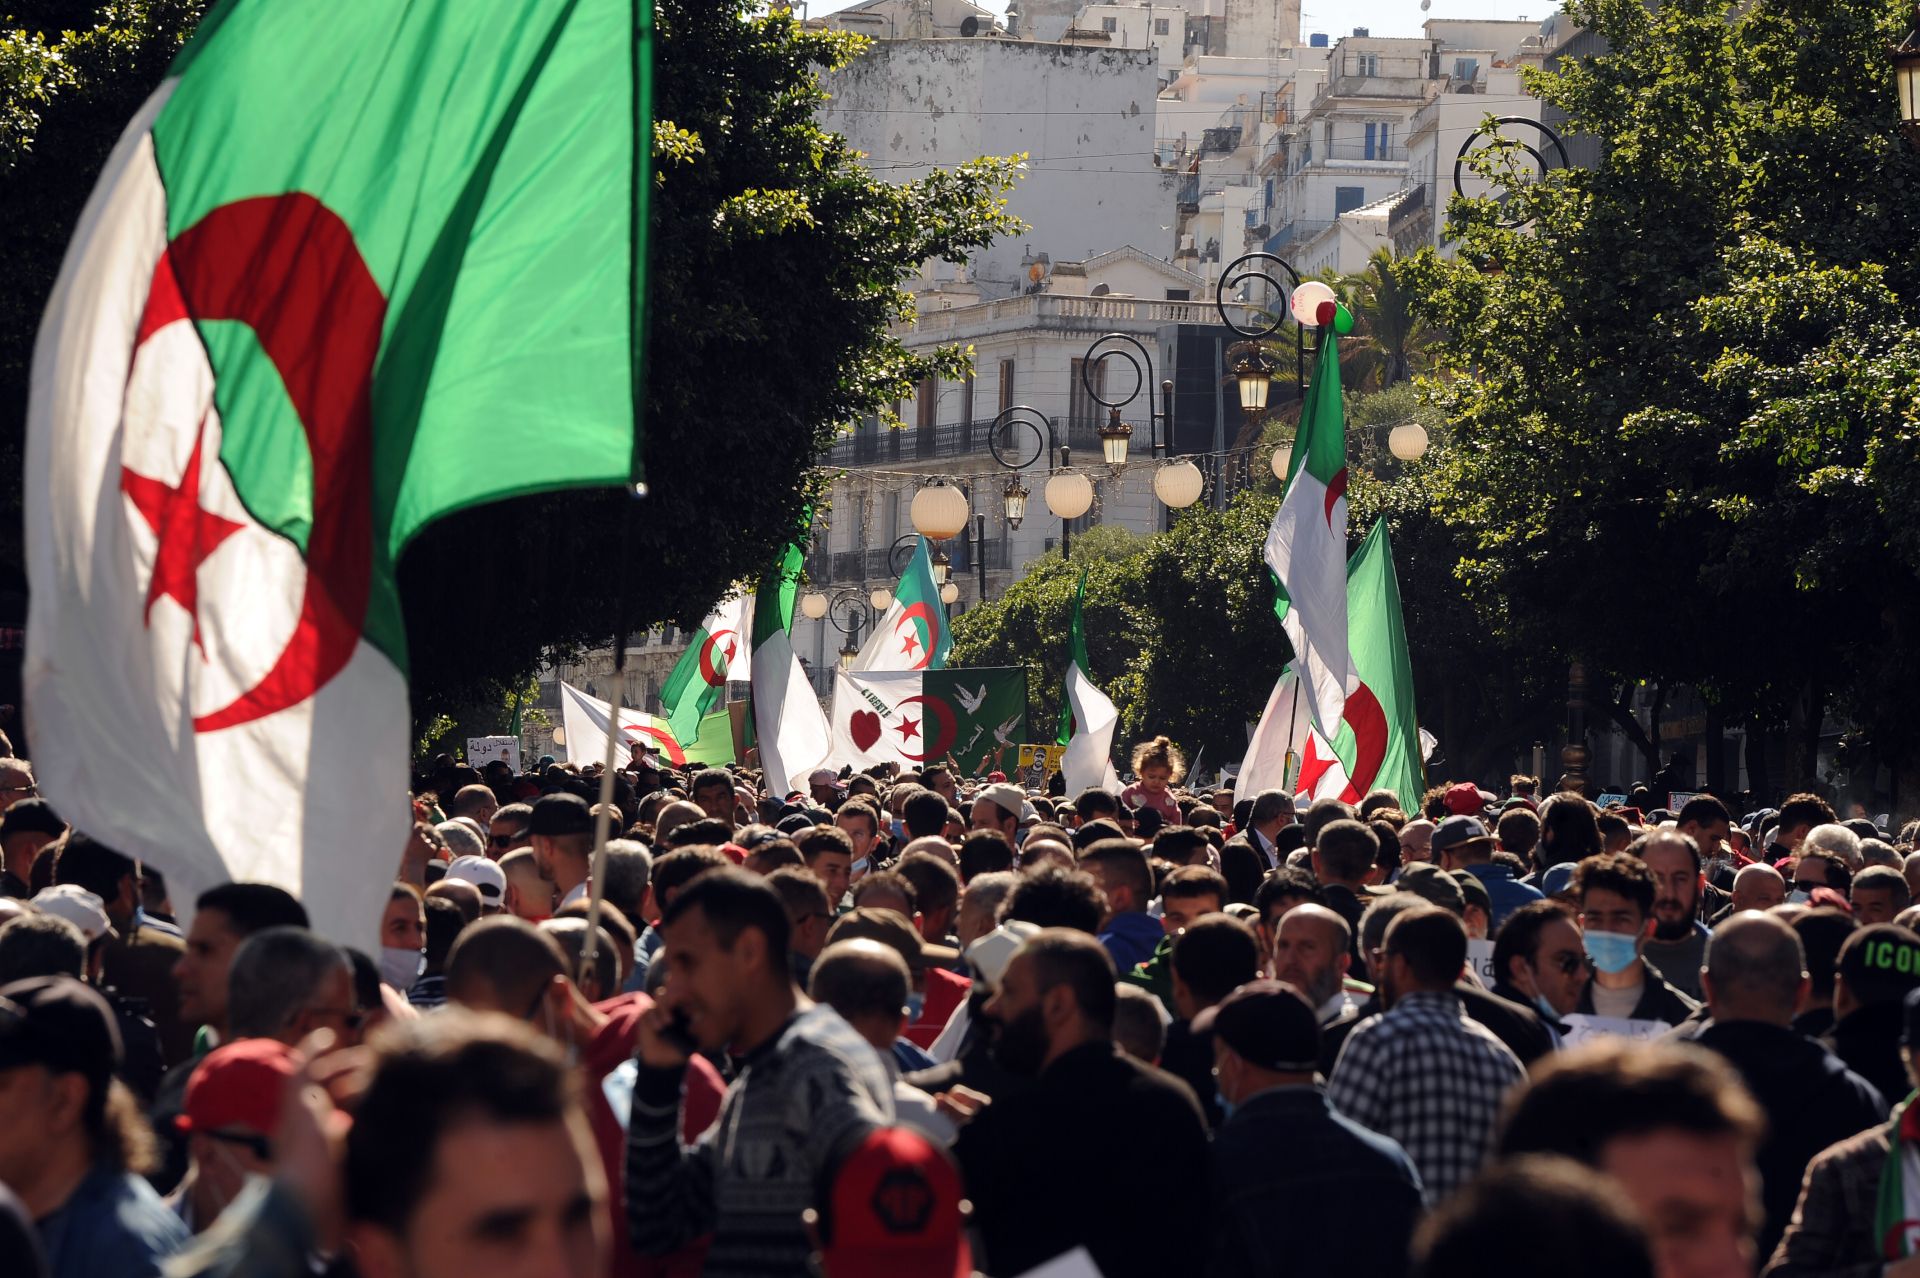 After a Brief Moment of Hope, Algeria’s Free Press Falls Silent